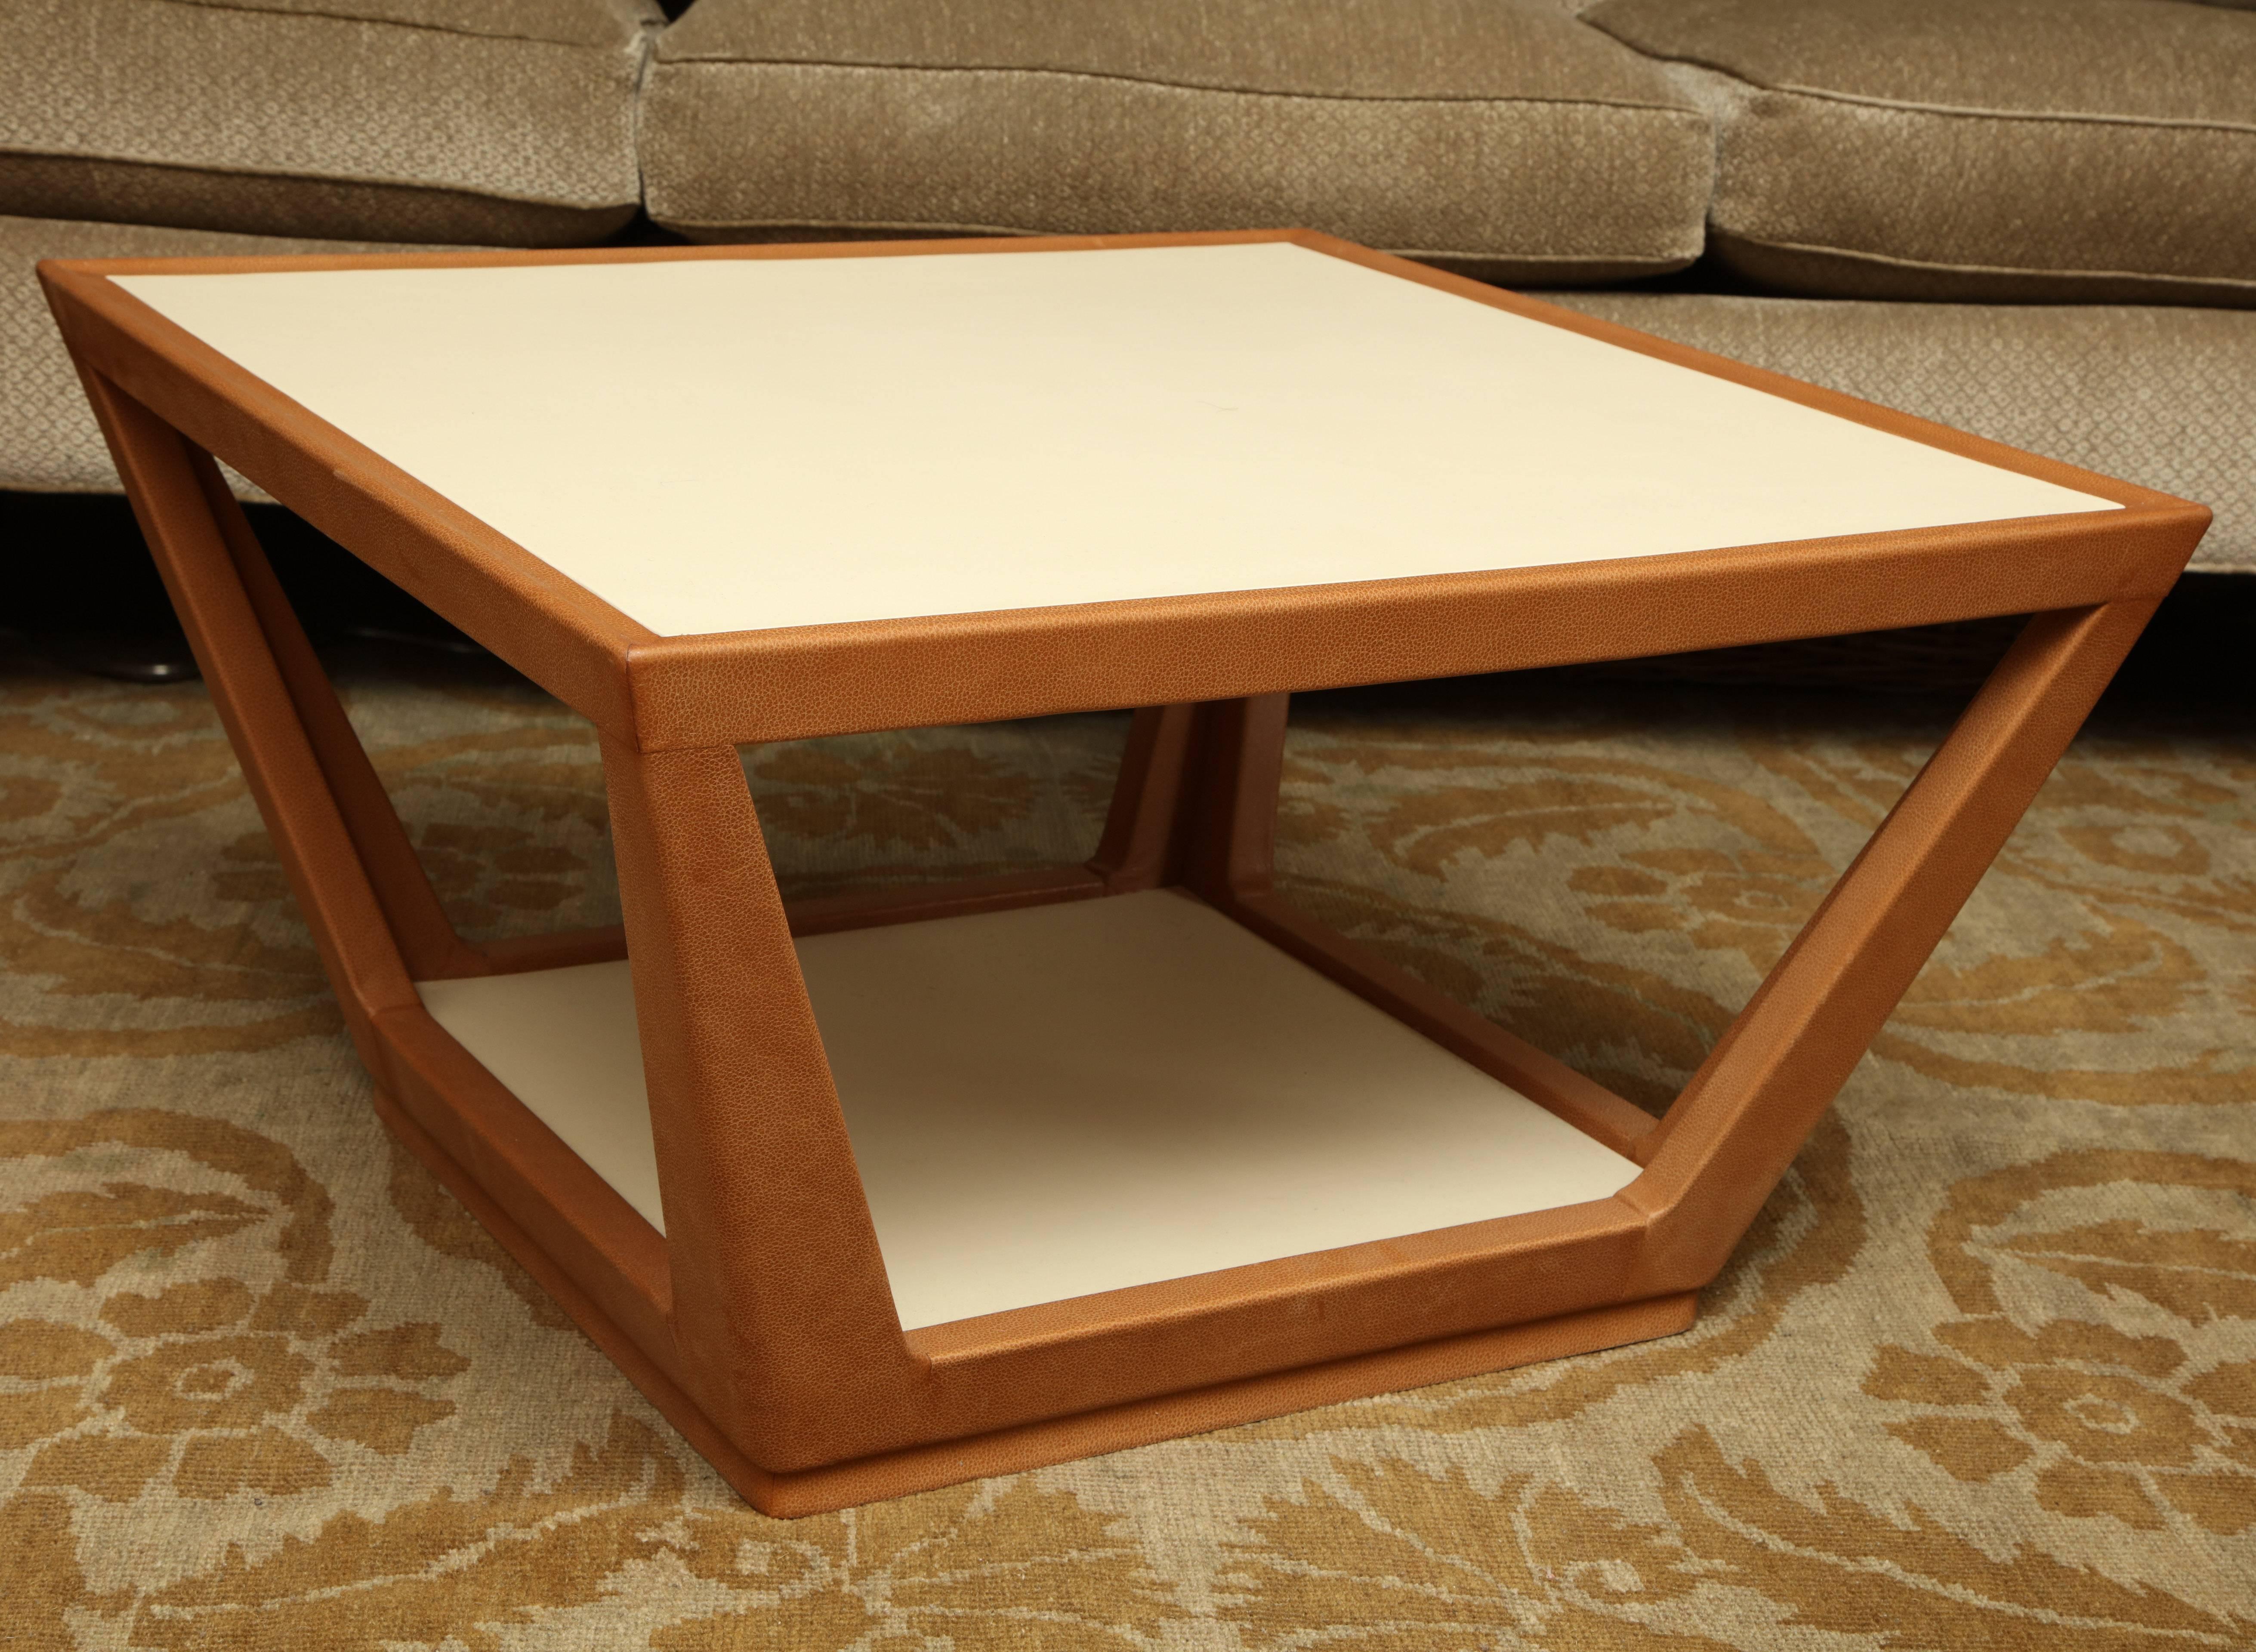 Edward Wormley for Drexel square coffee table fully clad in ochre and ivory leather.